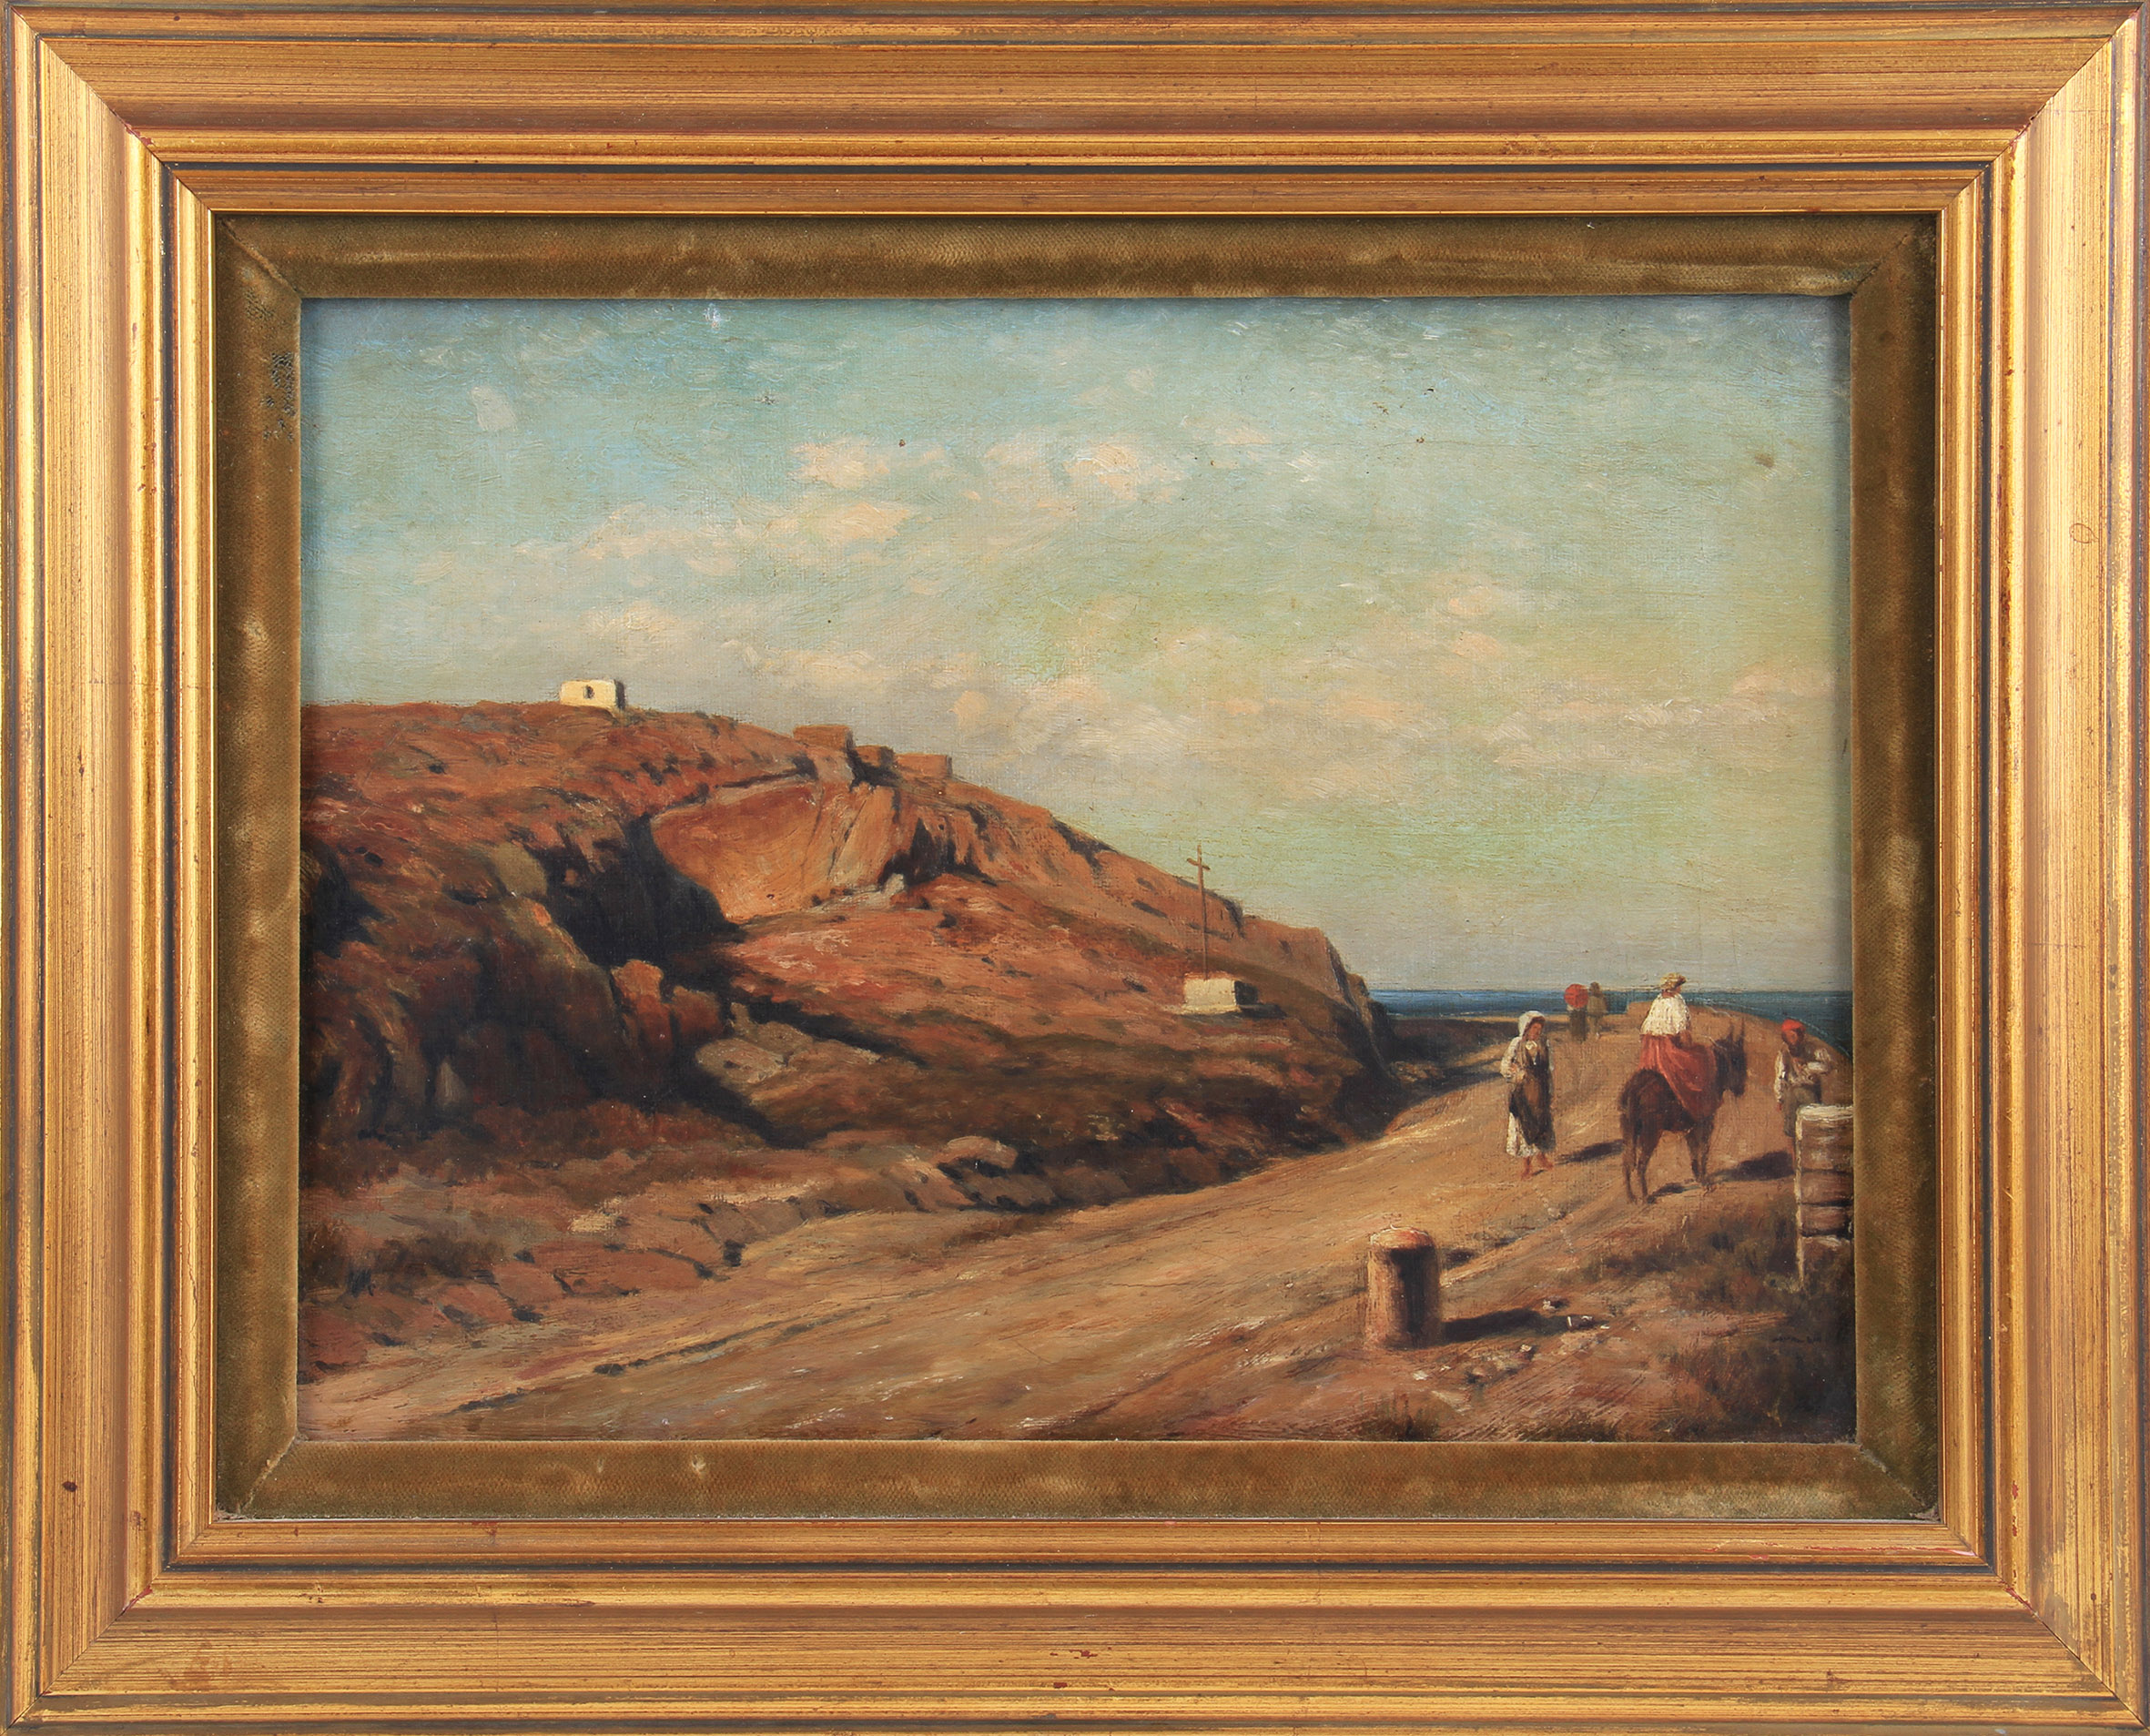 Framed, unsigned, oil on canvas, figures with donkey on coastal pathway with wooden cross set into - Image 2 of 2